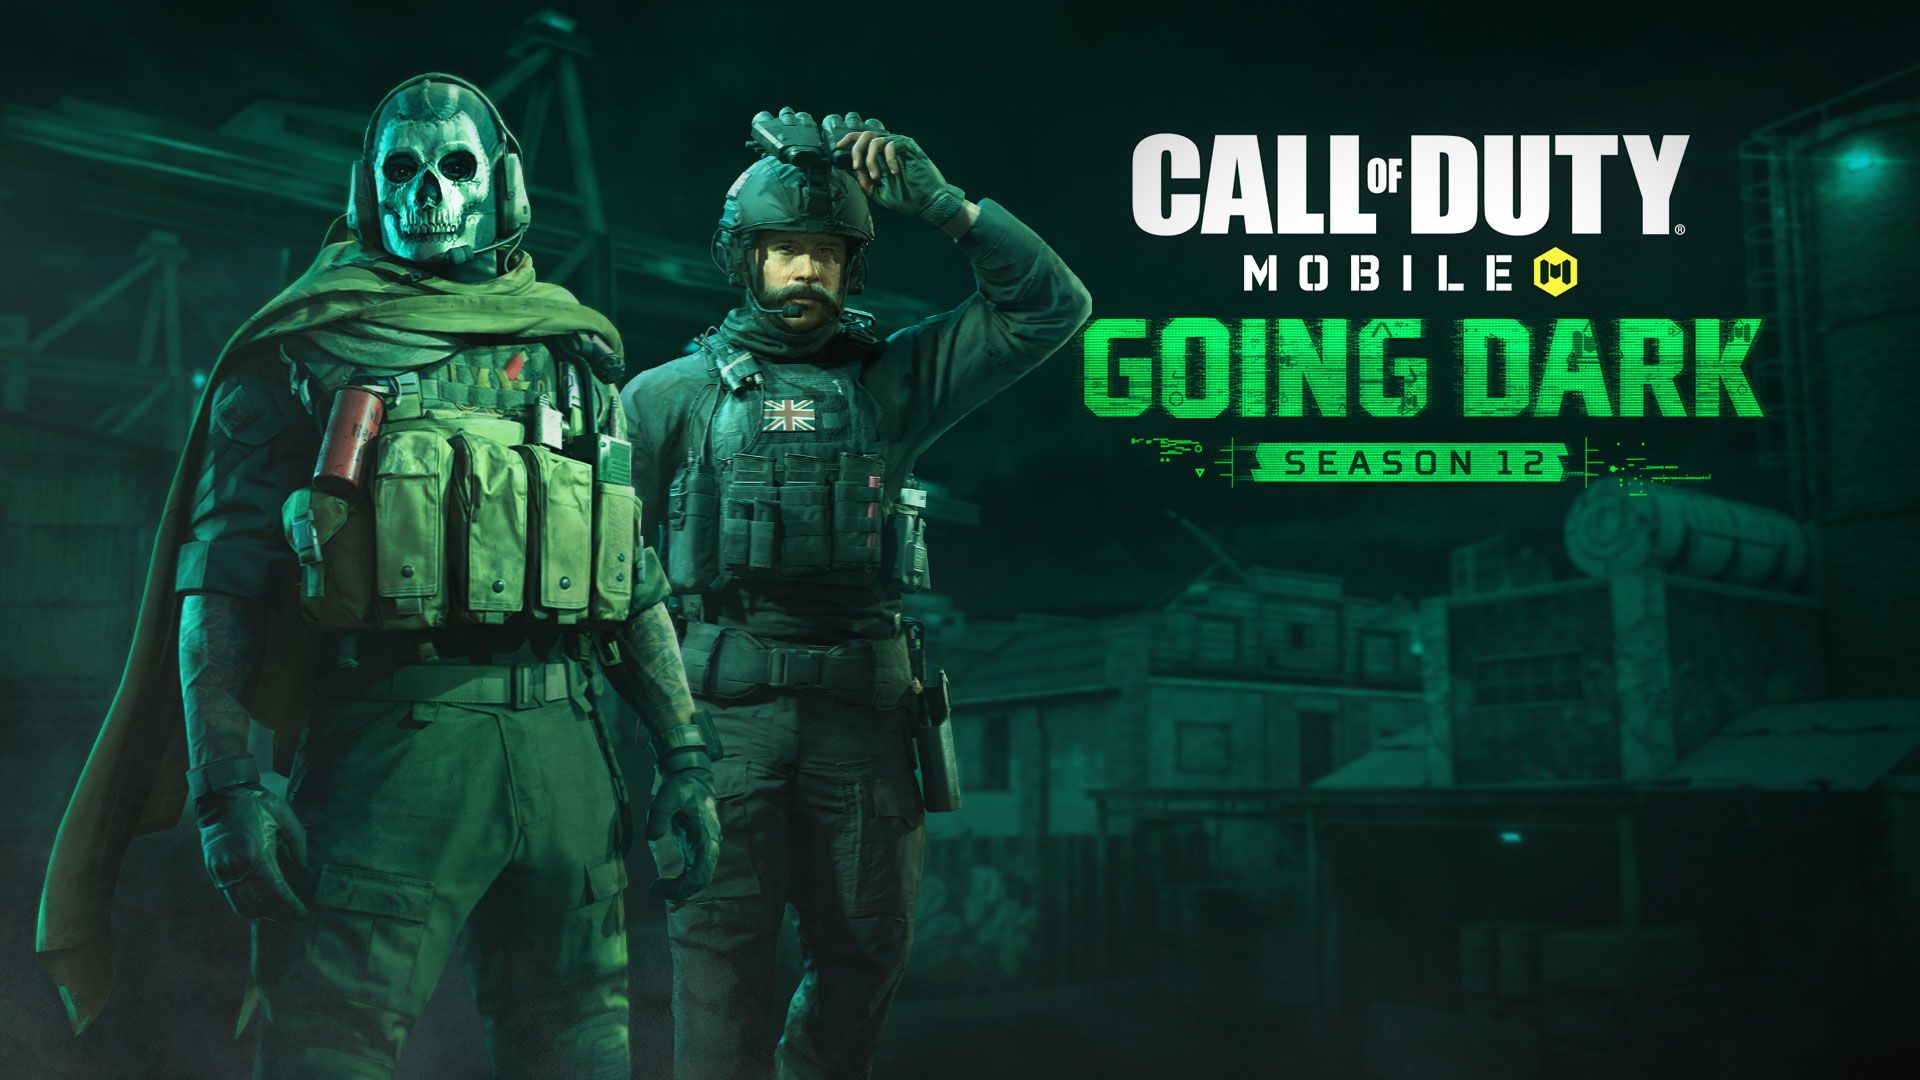 Night Descends on Call of Duty®: Mobile in Going Dark, the Latest Season Launching November 11